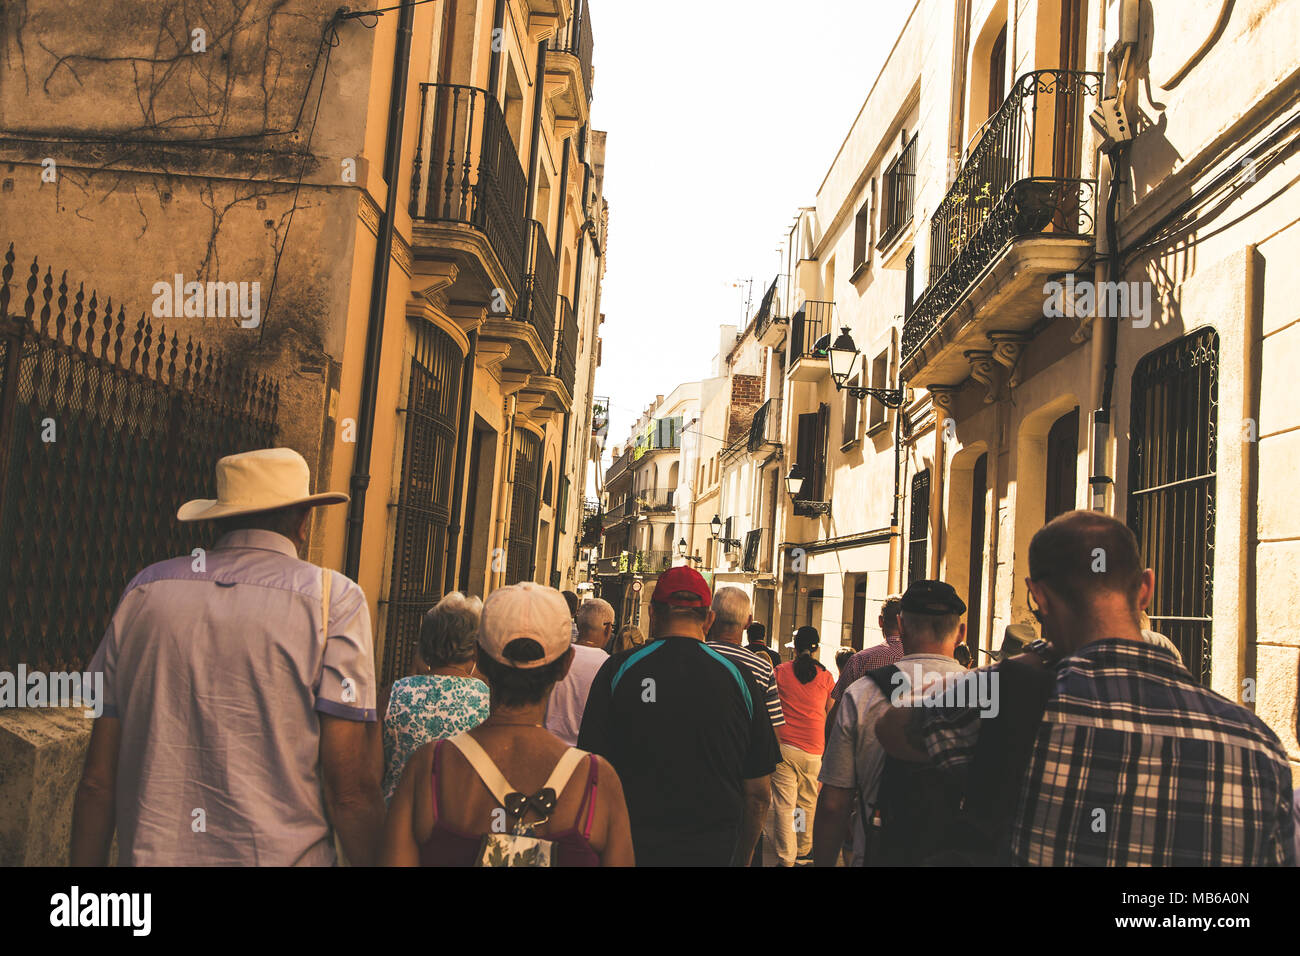 Tourists walking down a street in Spain. Some tourists are wearing caps, an elderly man wears a hat. Stock Photo